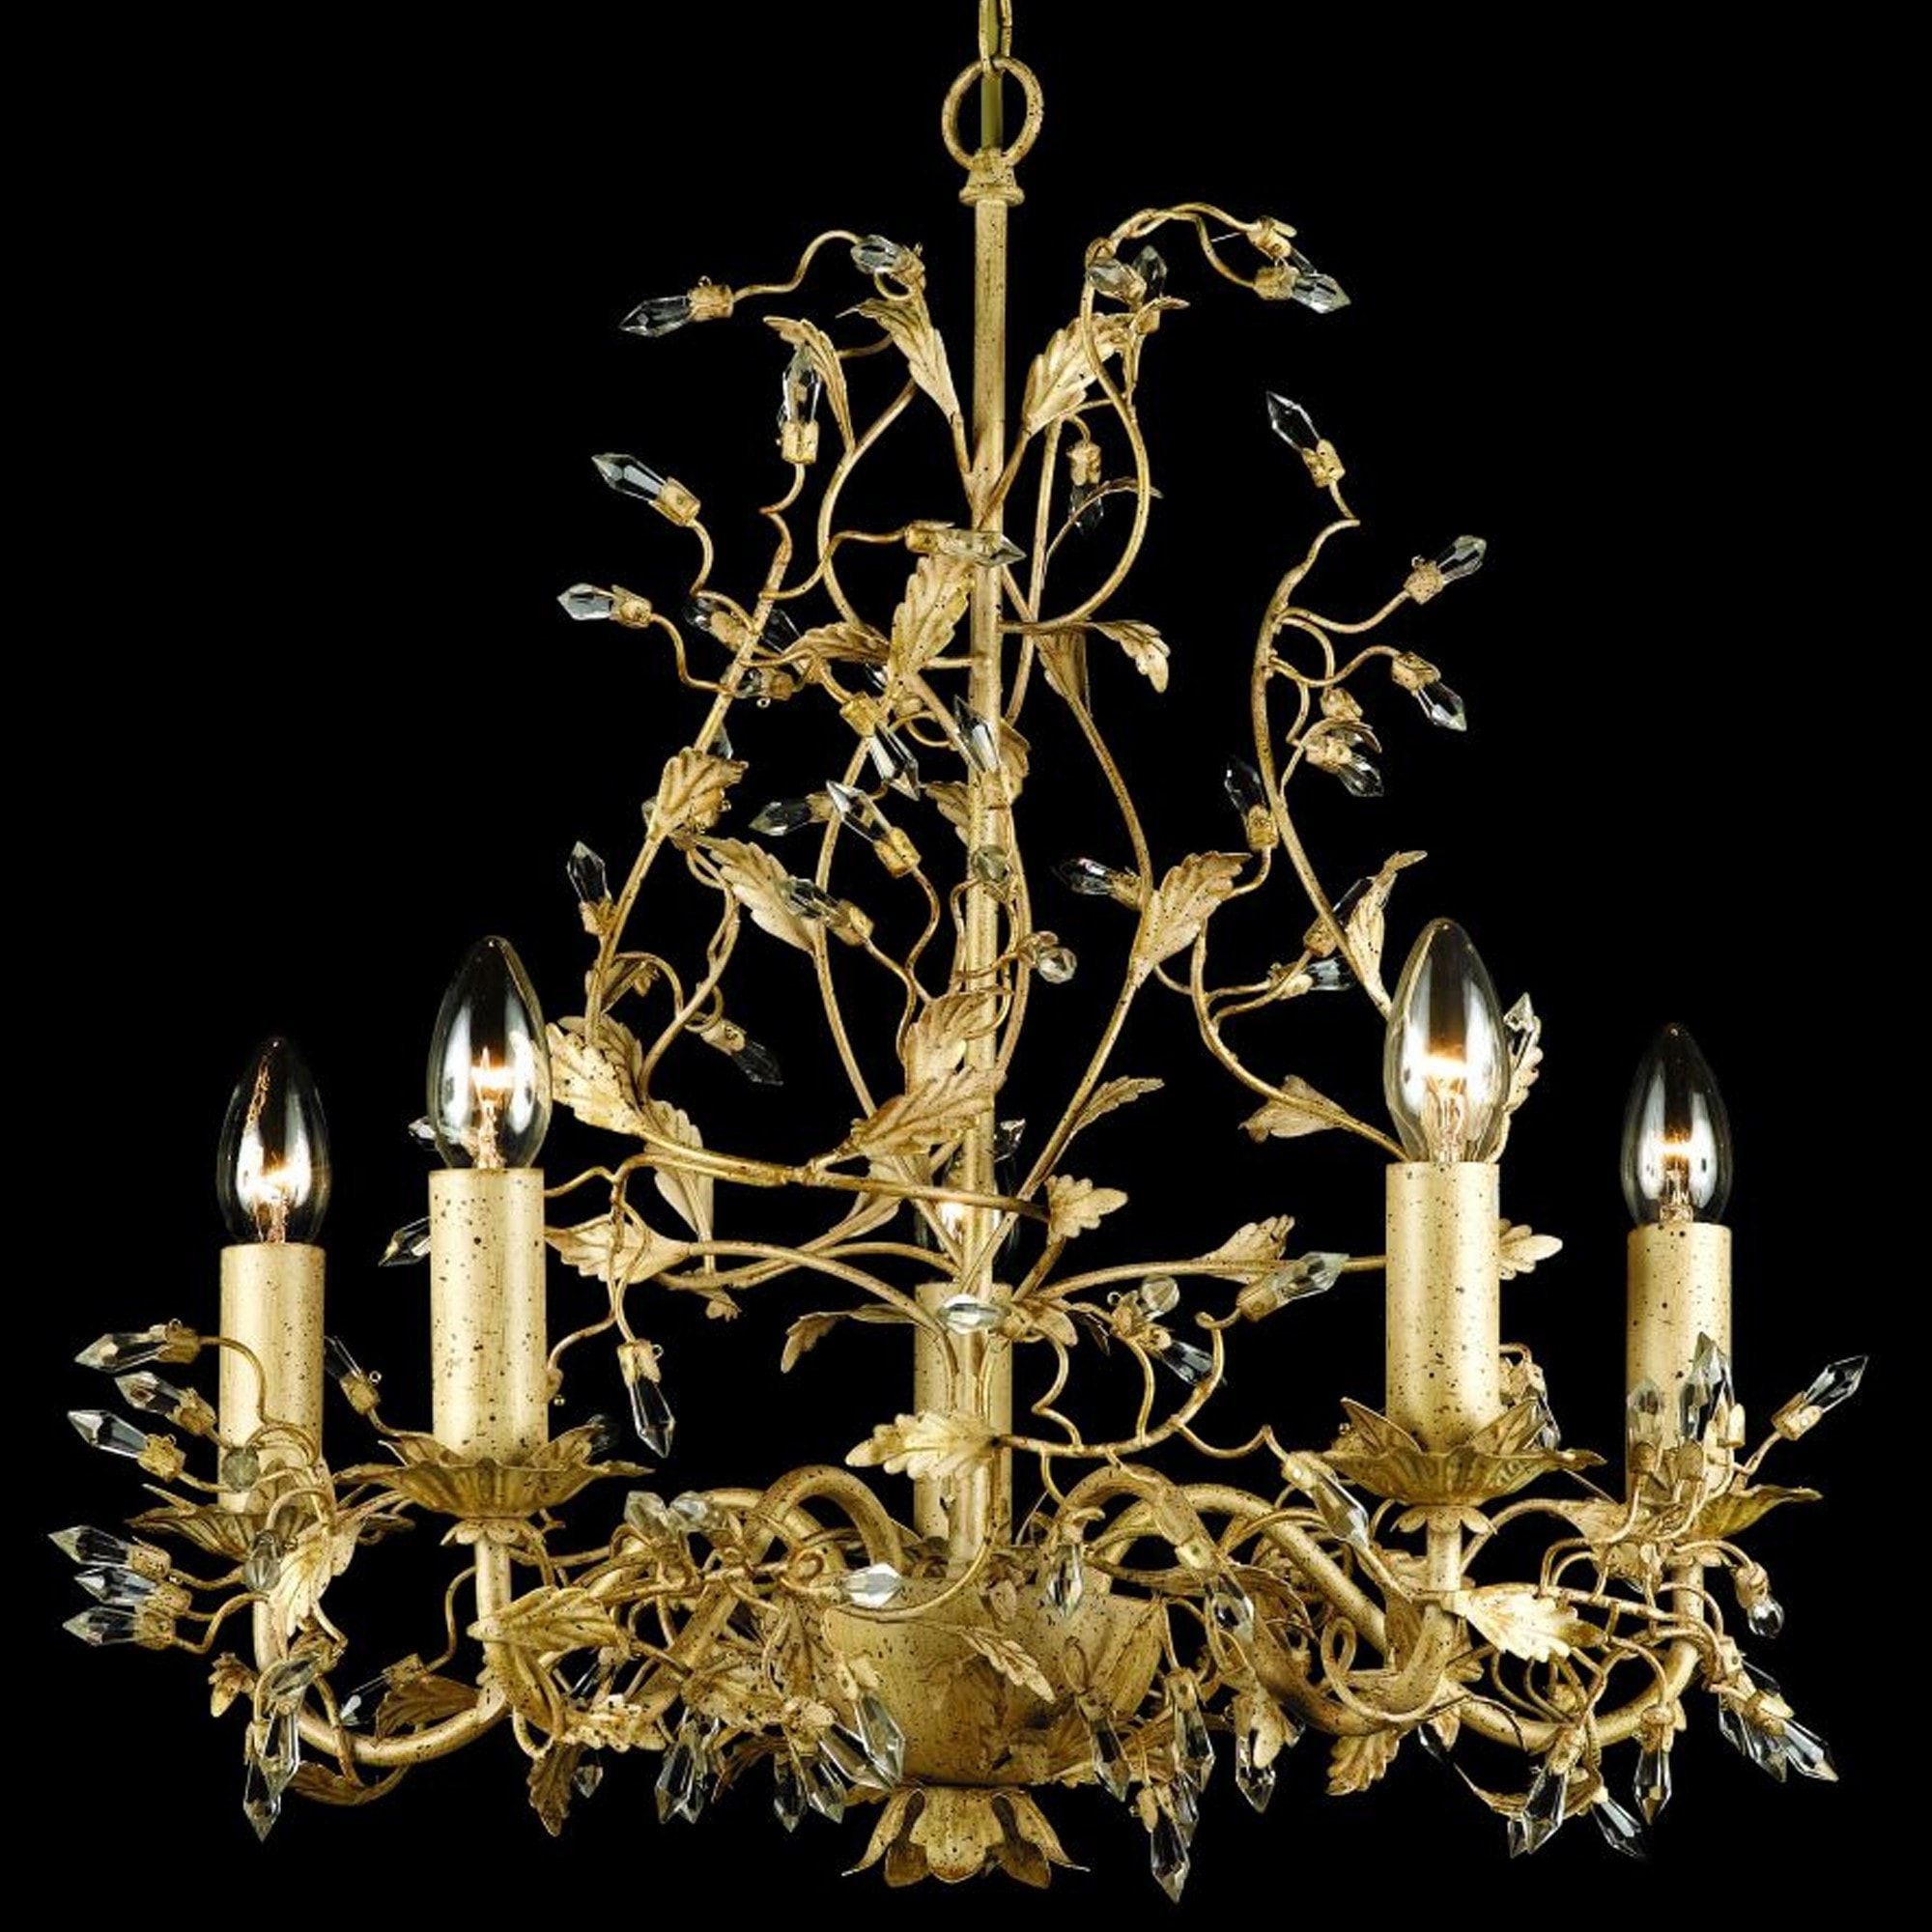 2020 Italiano Cream Gold Leaf And Crystal 5 Light Chandelier Throughout Antique Gold 18 Inch Four Light Chandeliers (View 9 of 15)